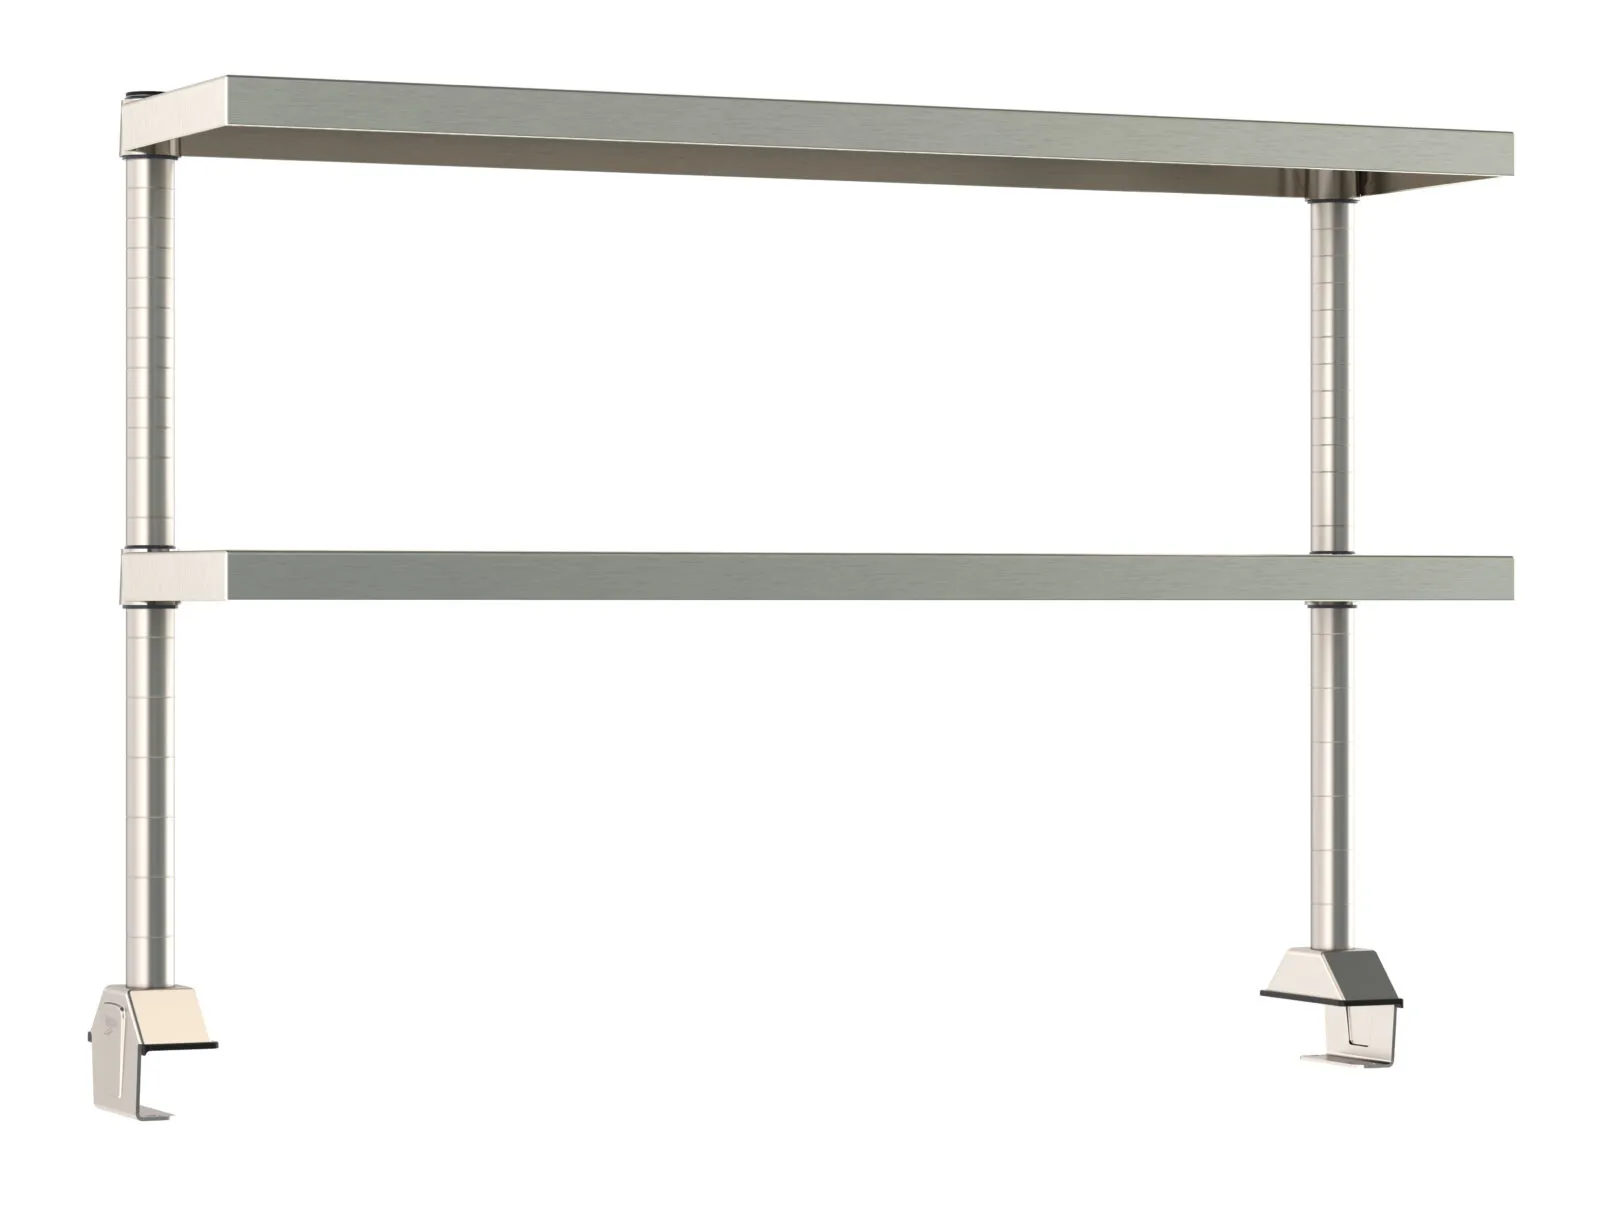 Stainless Steel Metro Tableworx 2 Rear Cantilever Stainless Steel Solid Shelf Risers